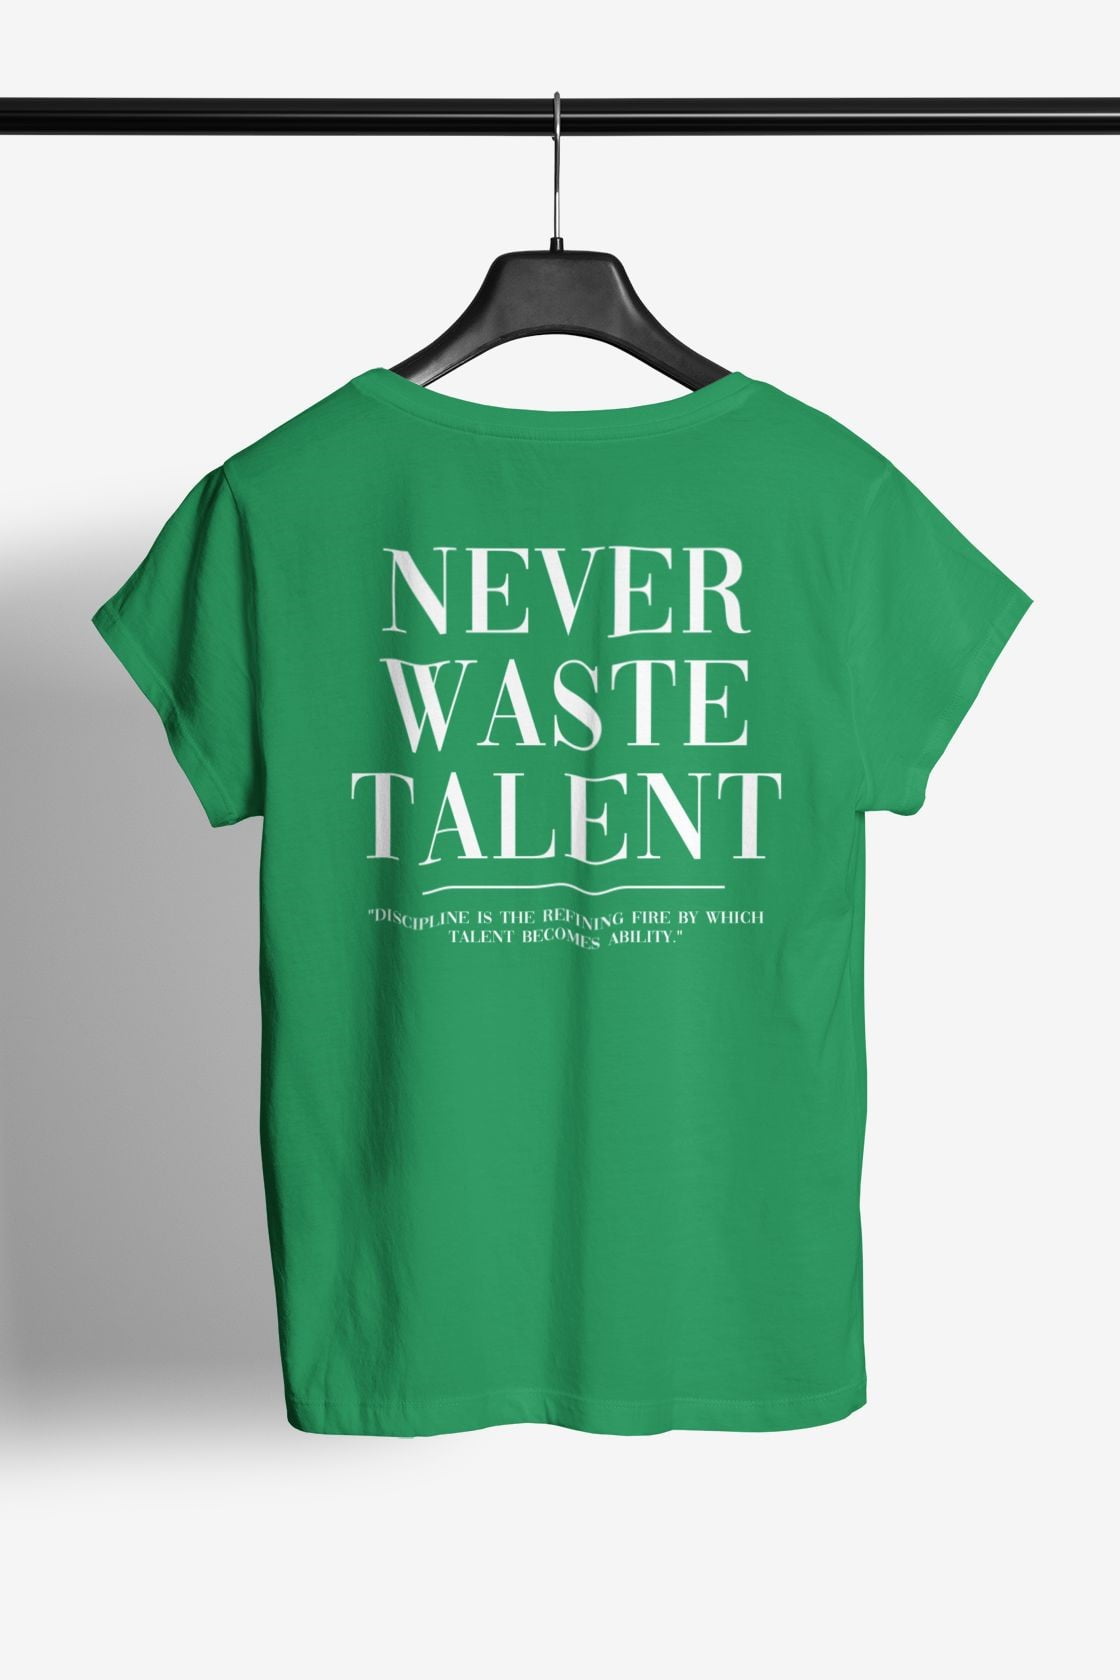 Never waste talent